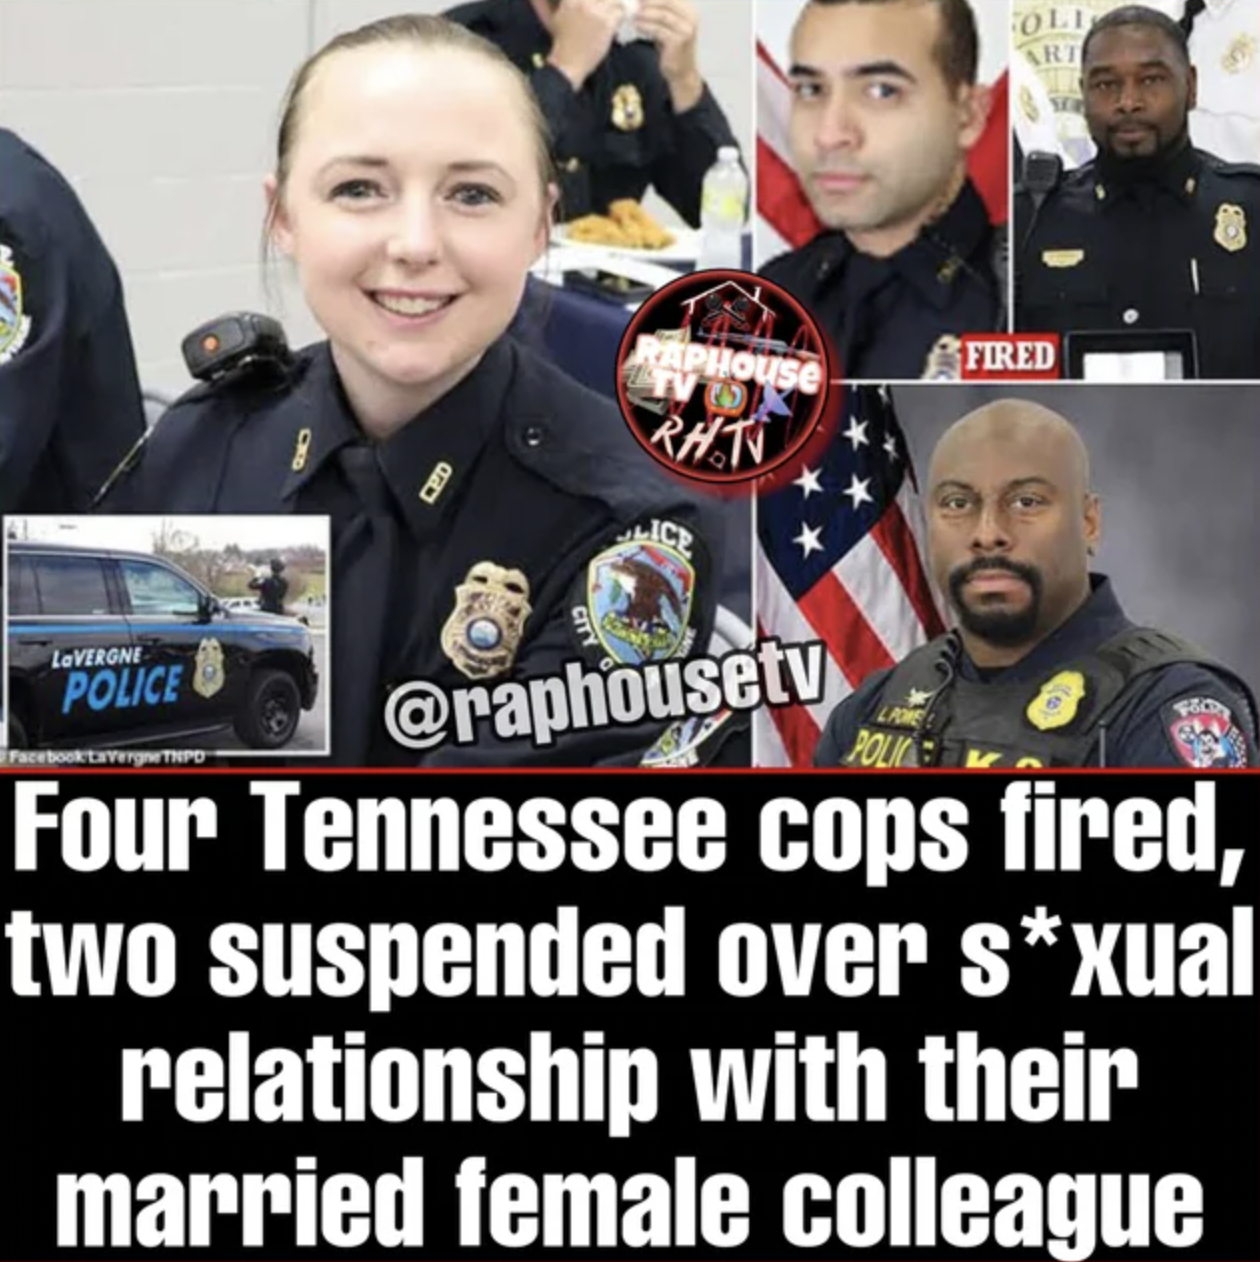 Facepalms and Fails - Rht Police Oli Art Polic Four Tennessee cops fired, two suspended over sxual relationship with their married female colleague Fired